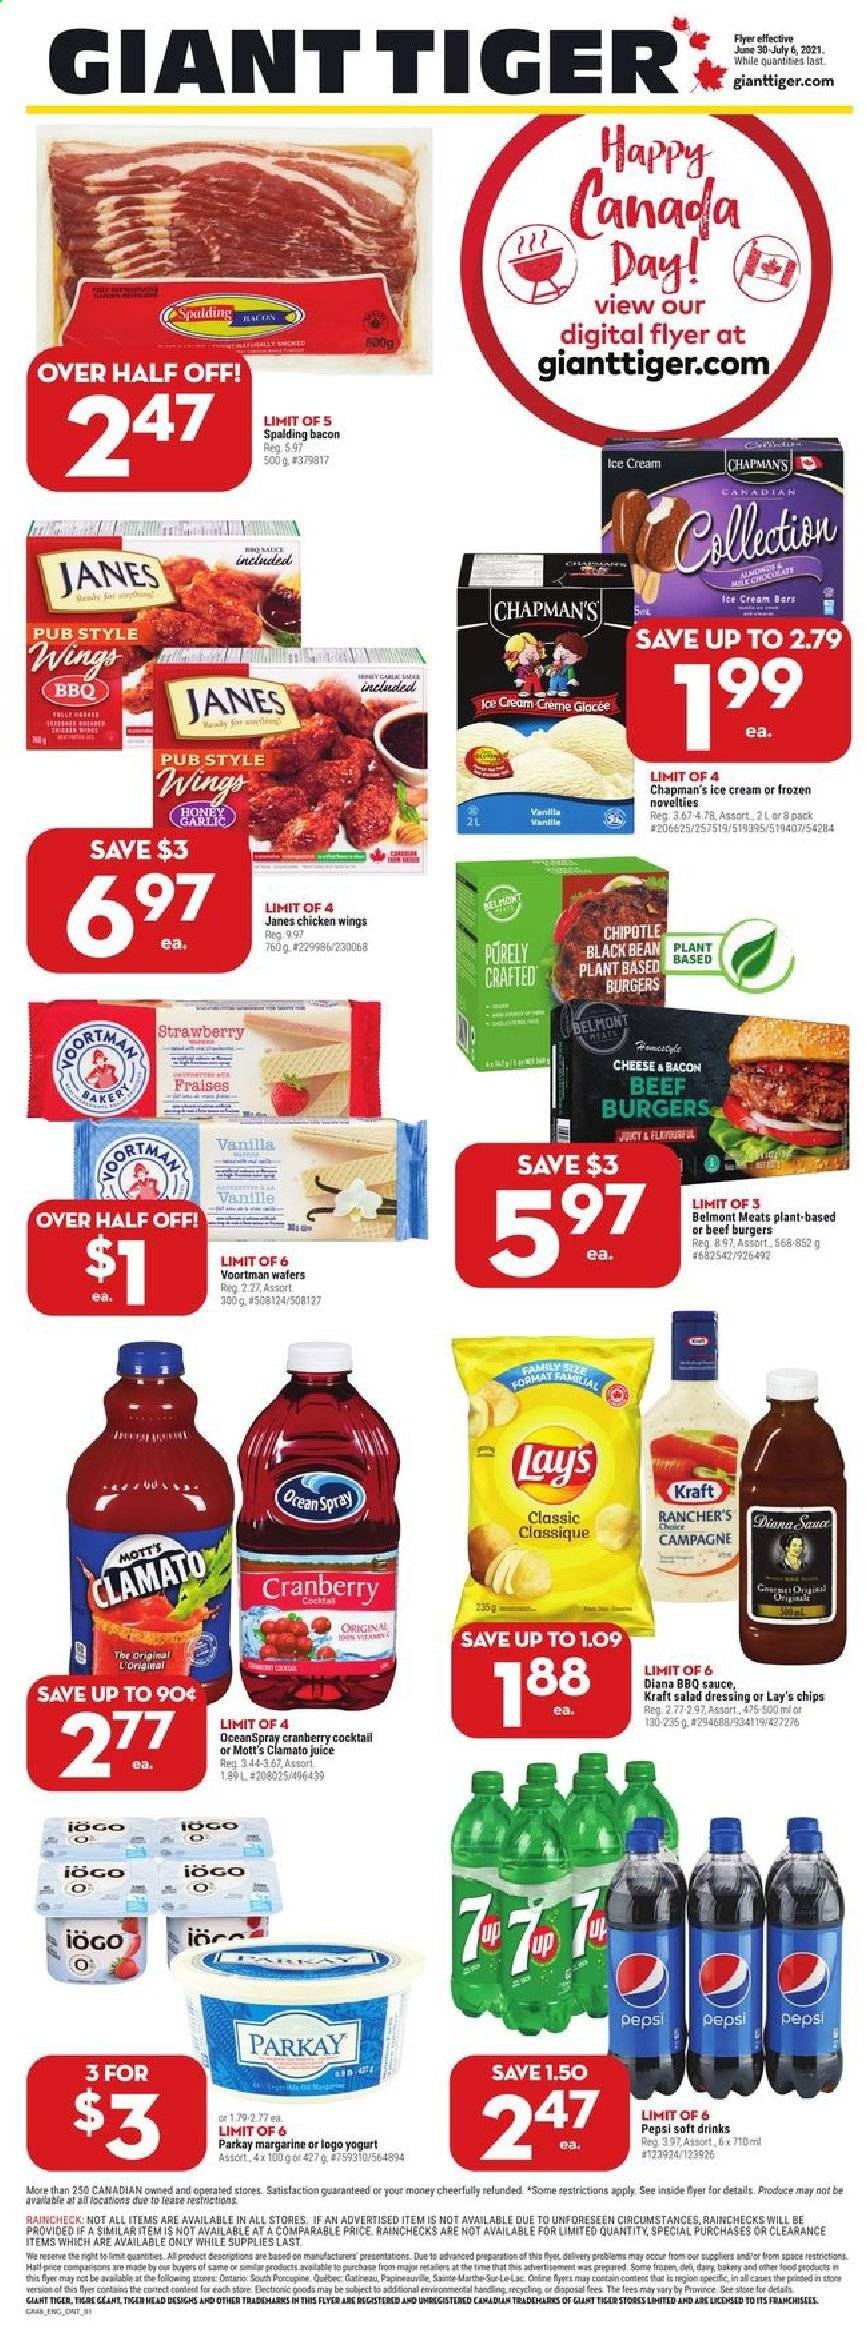 thumbnail - Giant Tiger Flyer - June 30, 2021 - July 06, 2021 - Sales products - Mott's, hamburger, beef burger, Kraft®, bacon, yoghurt, margarine, ice cream, ice cream bars, chicken wings, wafers, Lay’s, BBQ sauce, salad dressing, dressing, Pepsi, juice, Clamato, Spalding. Page 1.